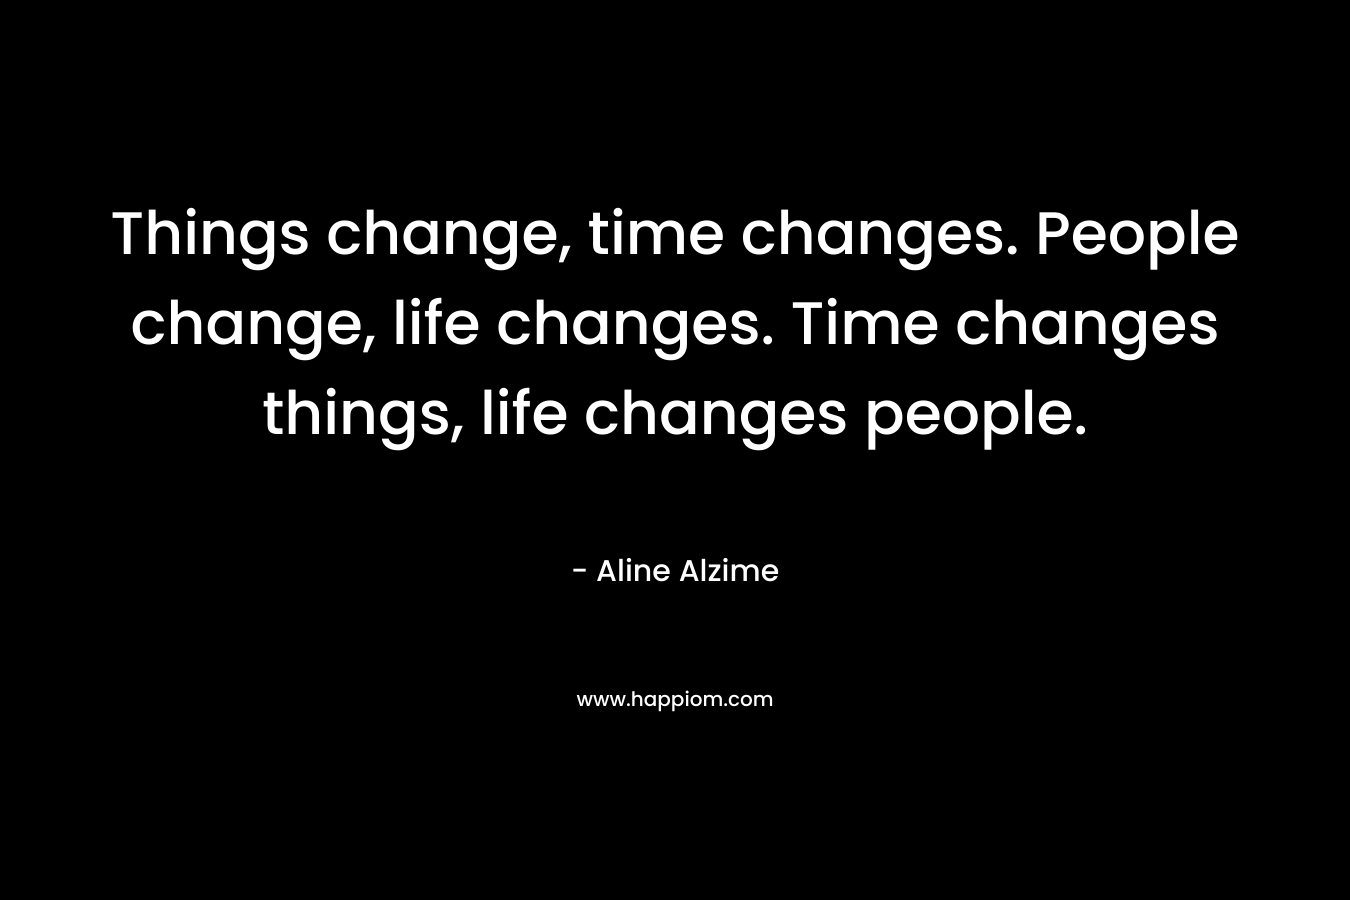 Things change, time changes. People change, life changes. Time changes things, life changes people. – Aline Alzime